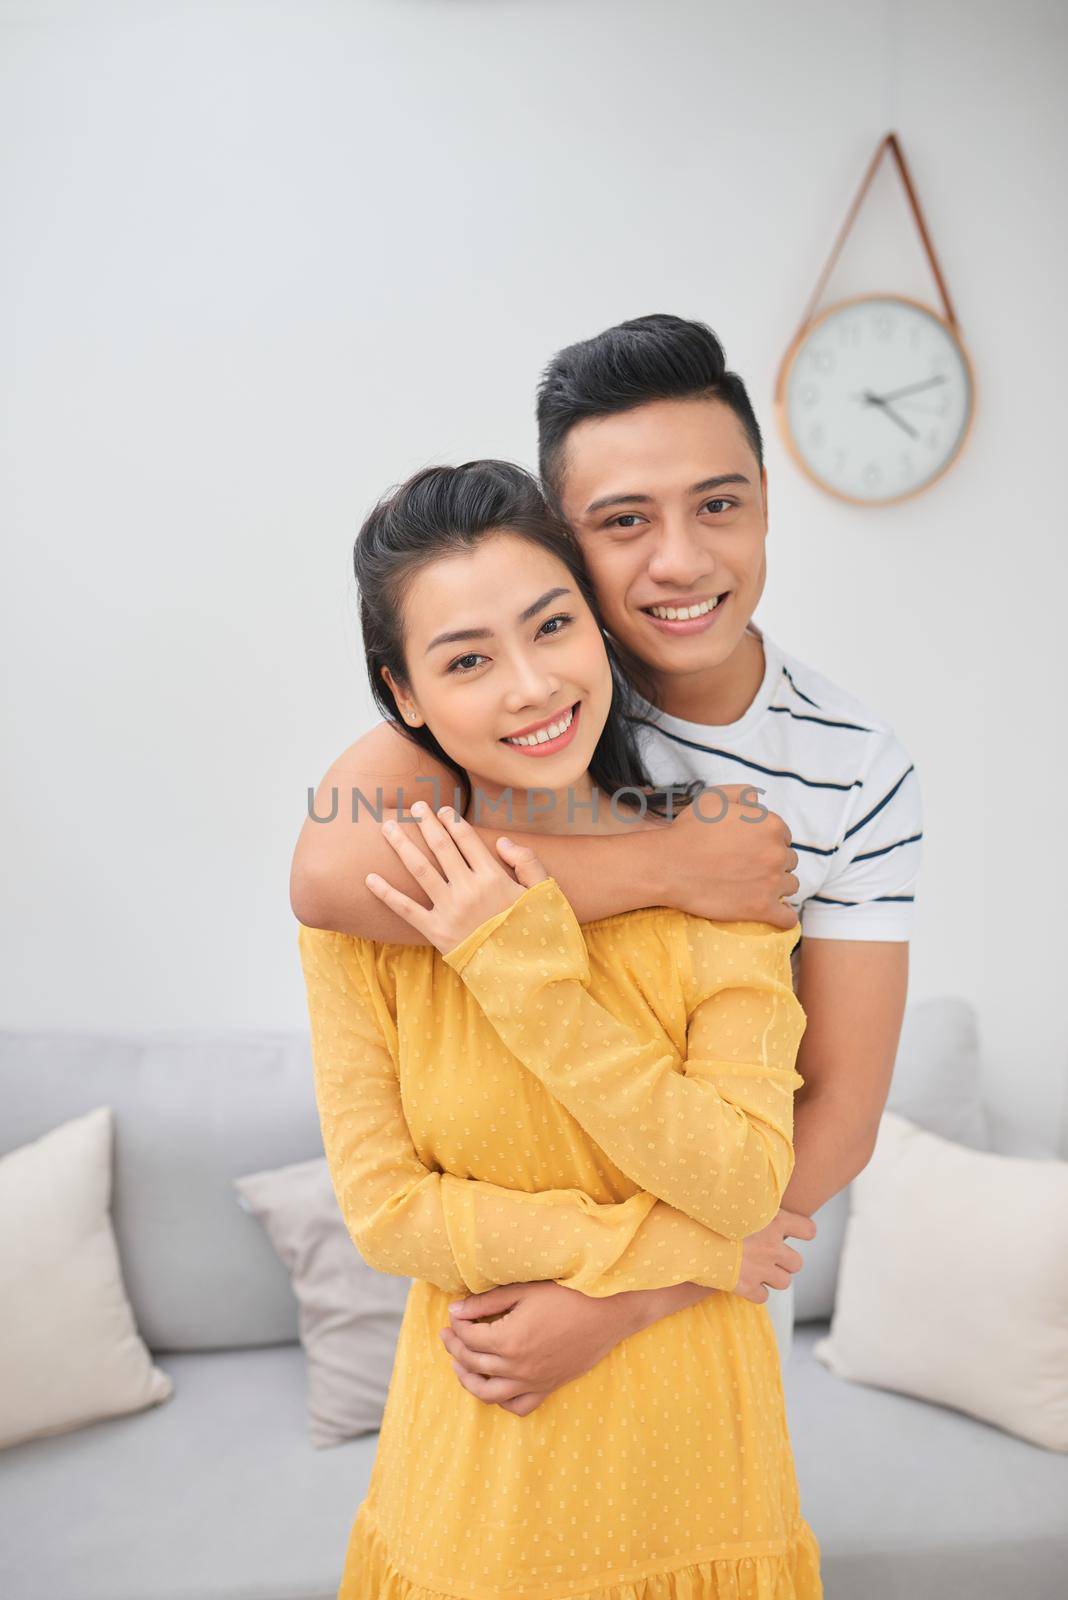 Romantic young couple embracing in living room